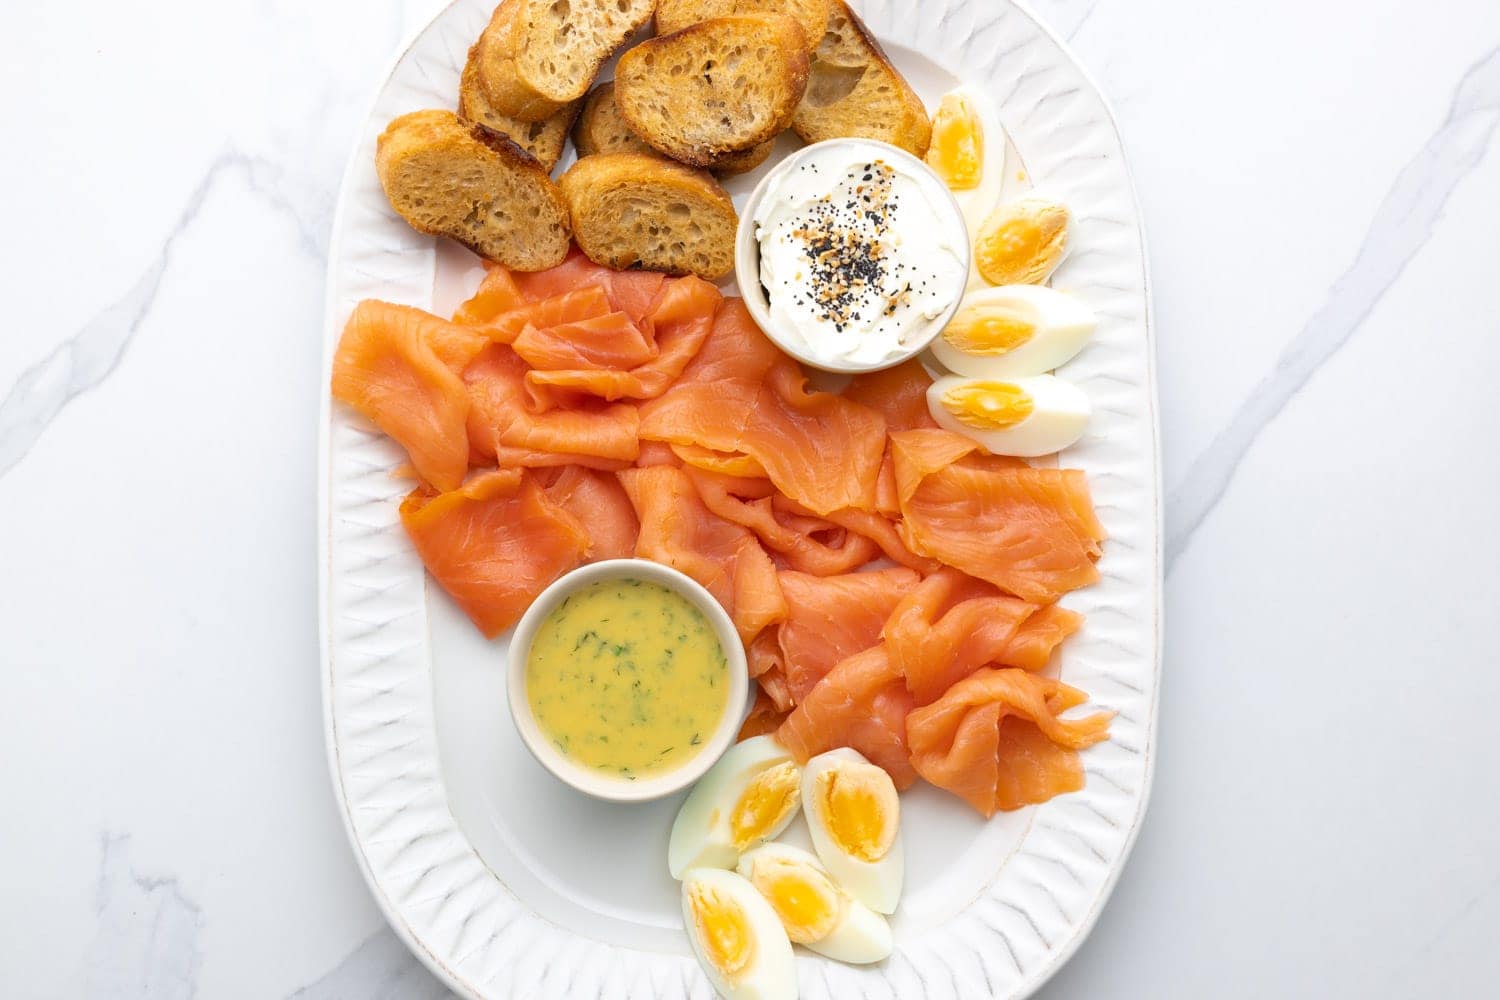 Quartered hard boiled eggs, crispy bread, sliced smoked salmon, and two types of sauces on a platter.